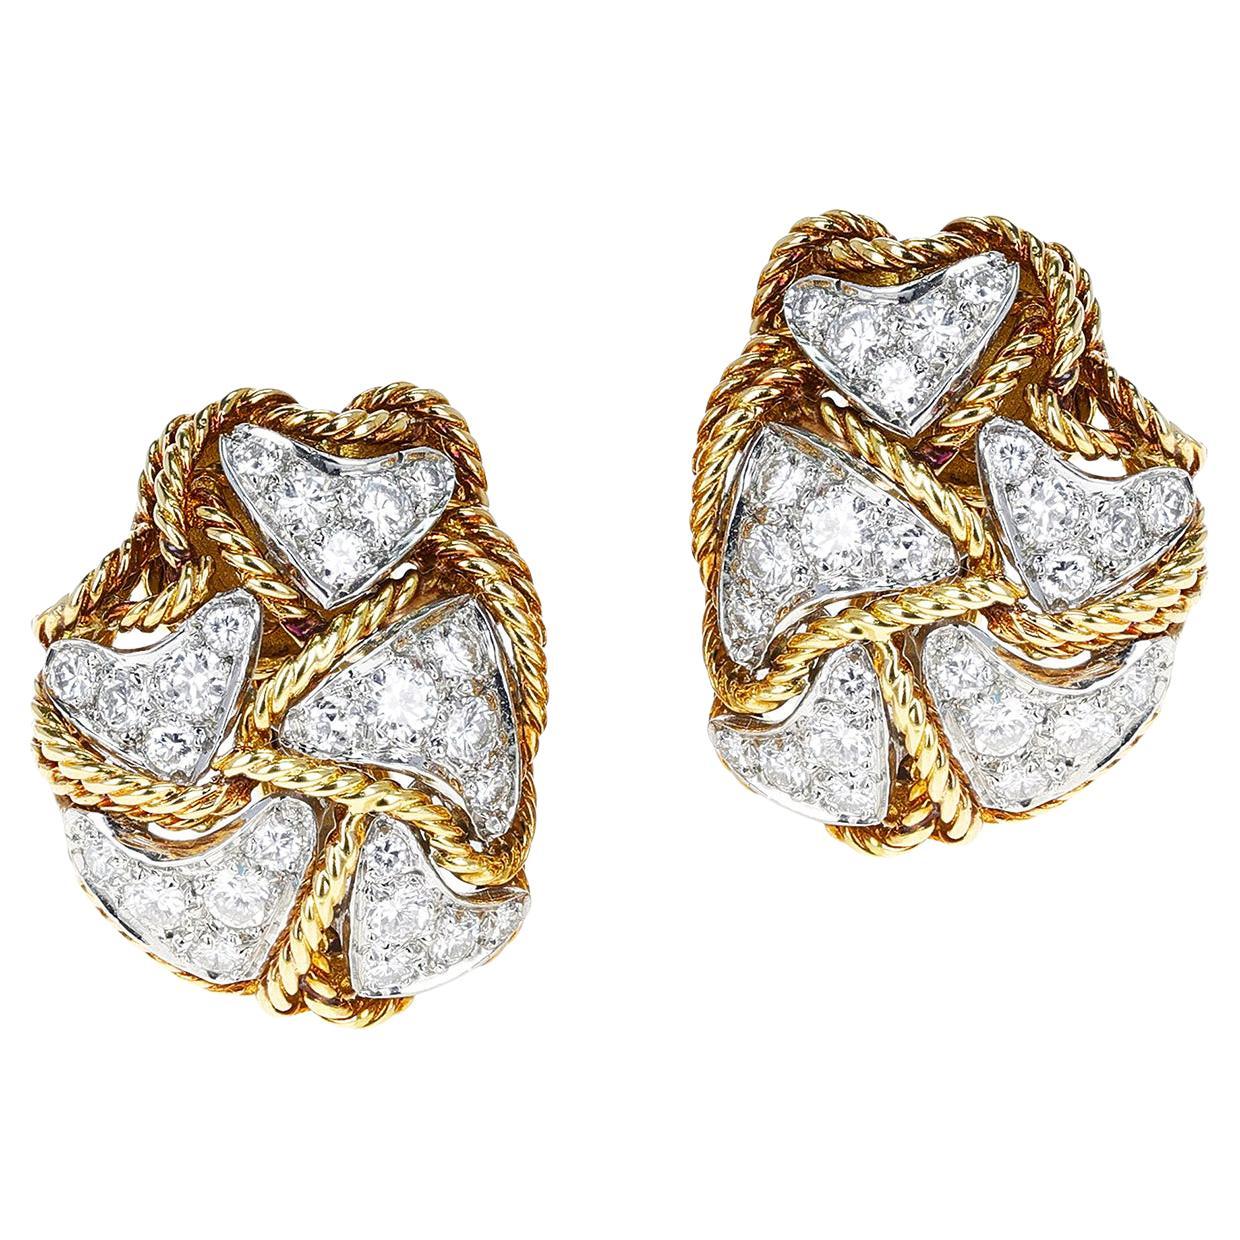 1960's Cartier 3.25 Carats Diamond Cocktail Earrings in 18K Yellow Gold